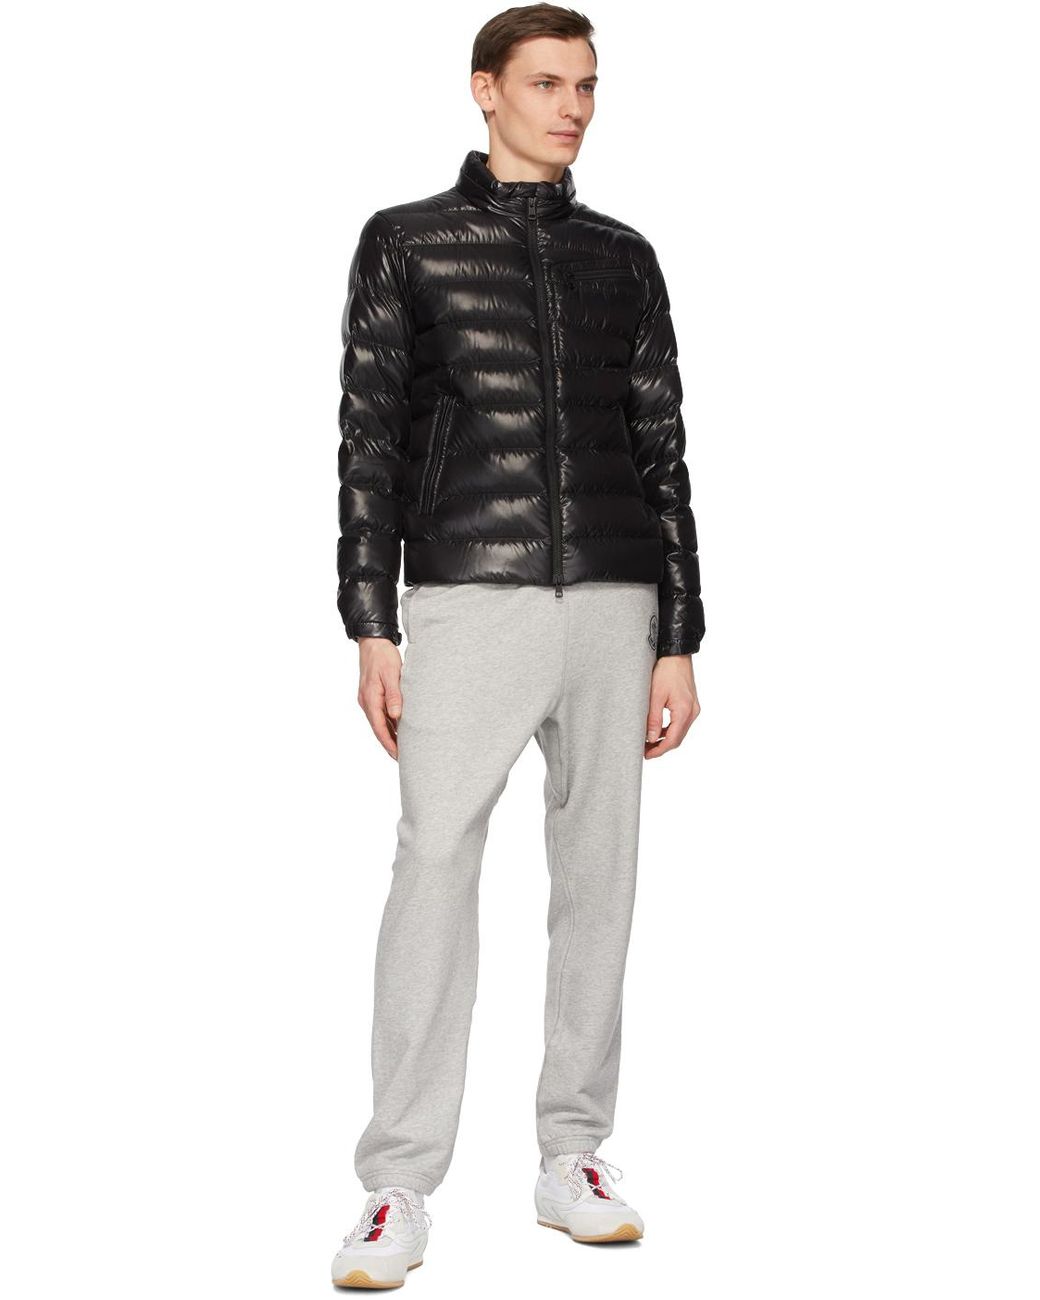 Moncler Genius Synthetic 2 Moncler 1952 Down Amalthea Jacket in 